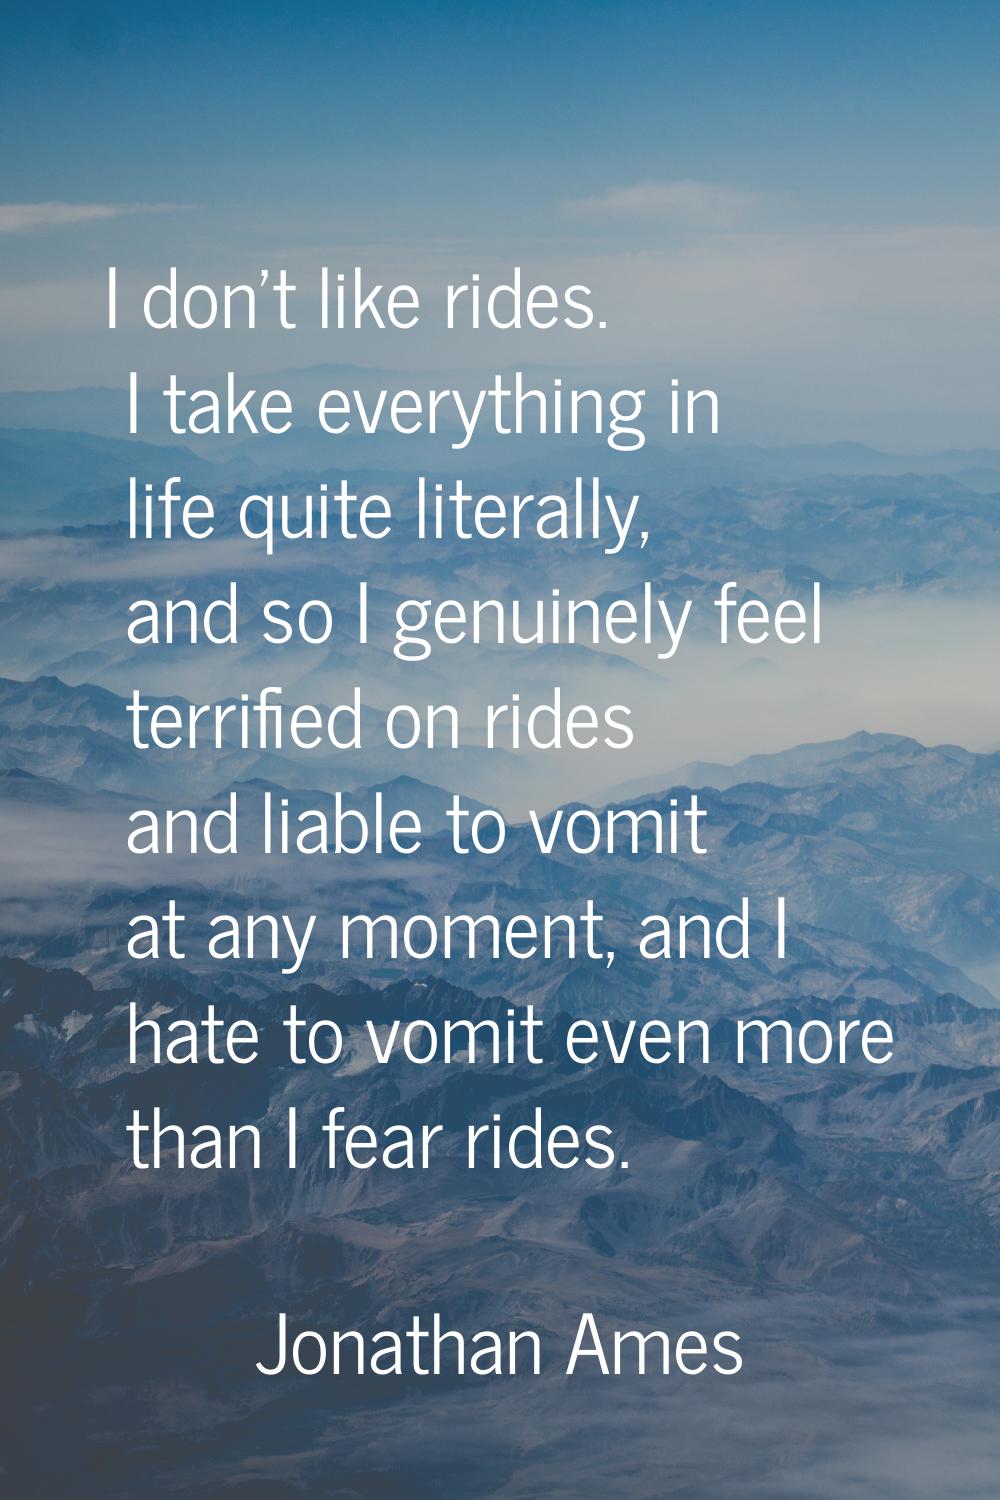 I don't like rides. I take everything in life quite literally, and so I genuinely feel terrified on